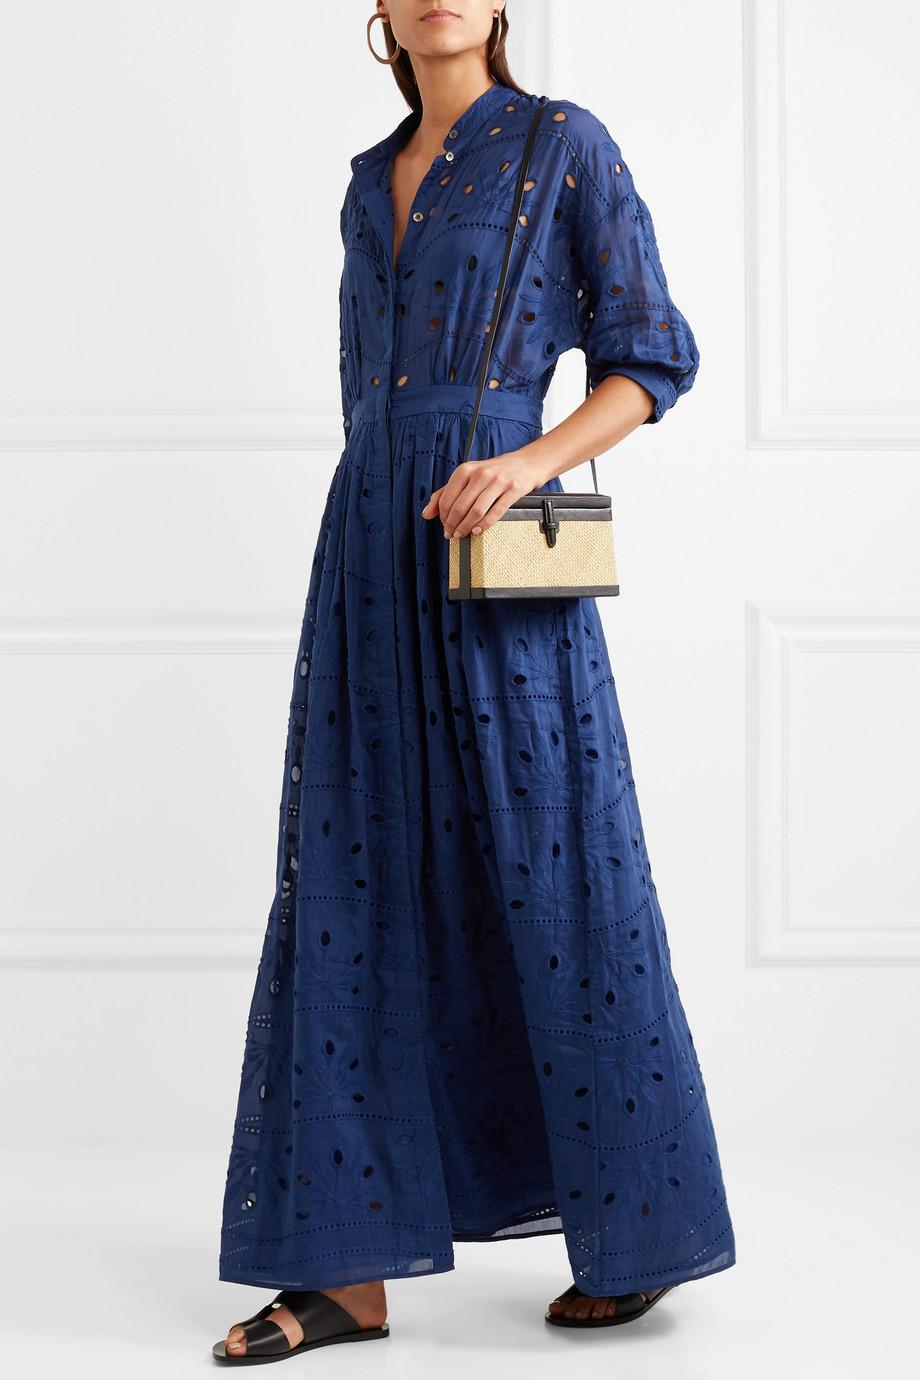 navy blue broderie anglaise dress